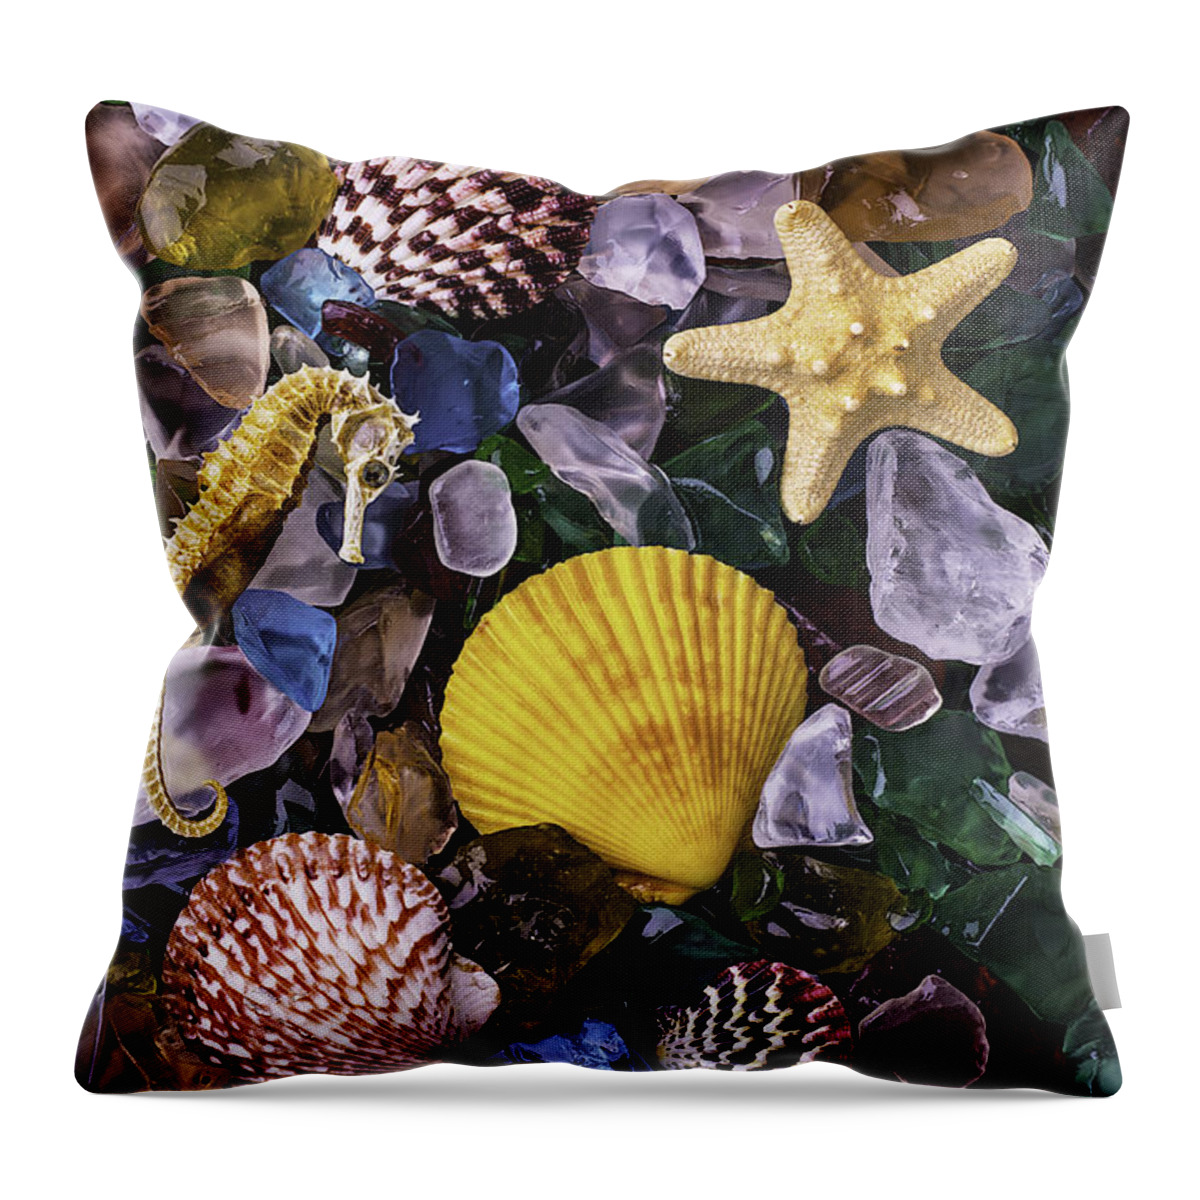 Colorfull Throw Pillow featuring the photograph Starfish And Sea Horse by Garry Gay